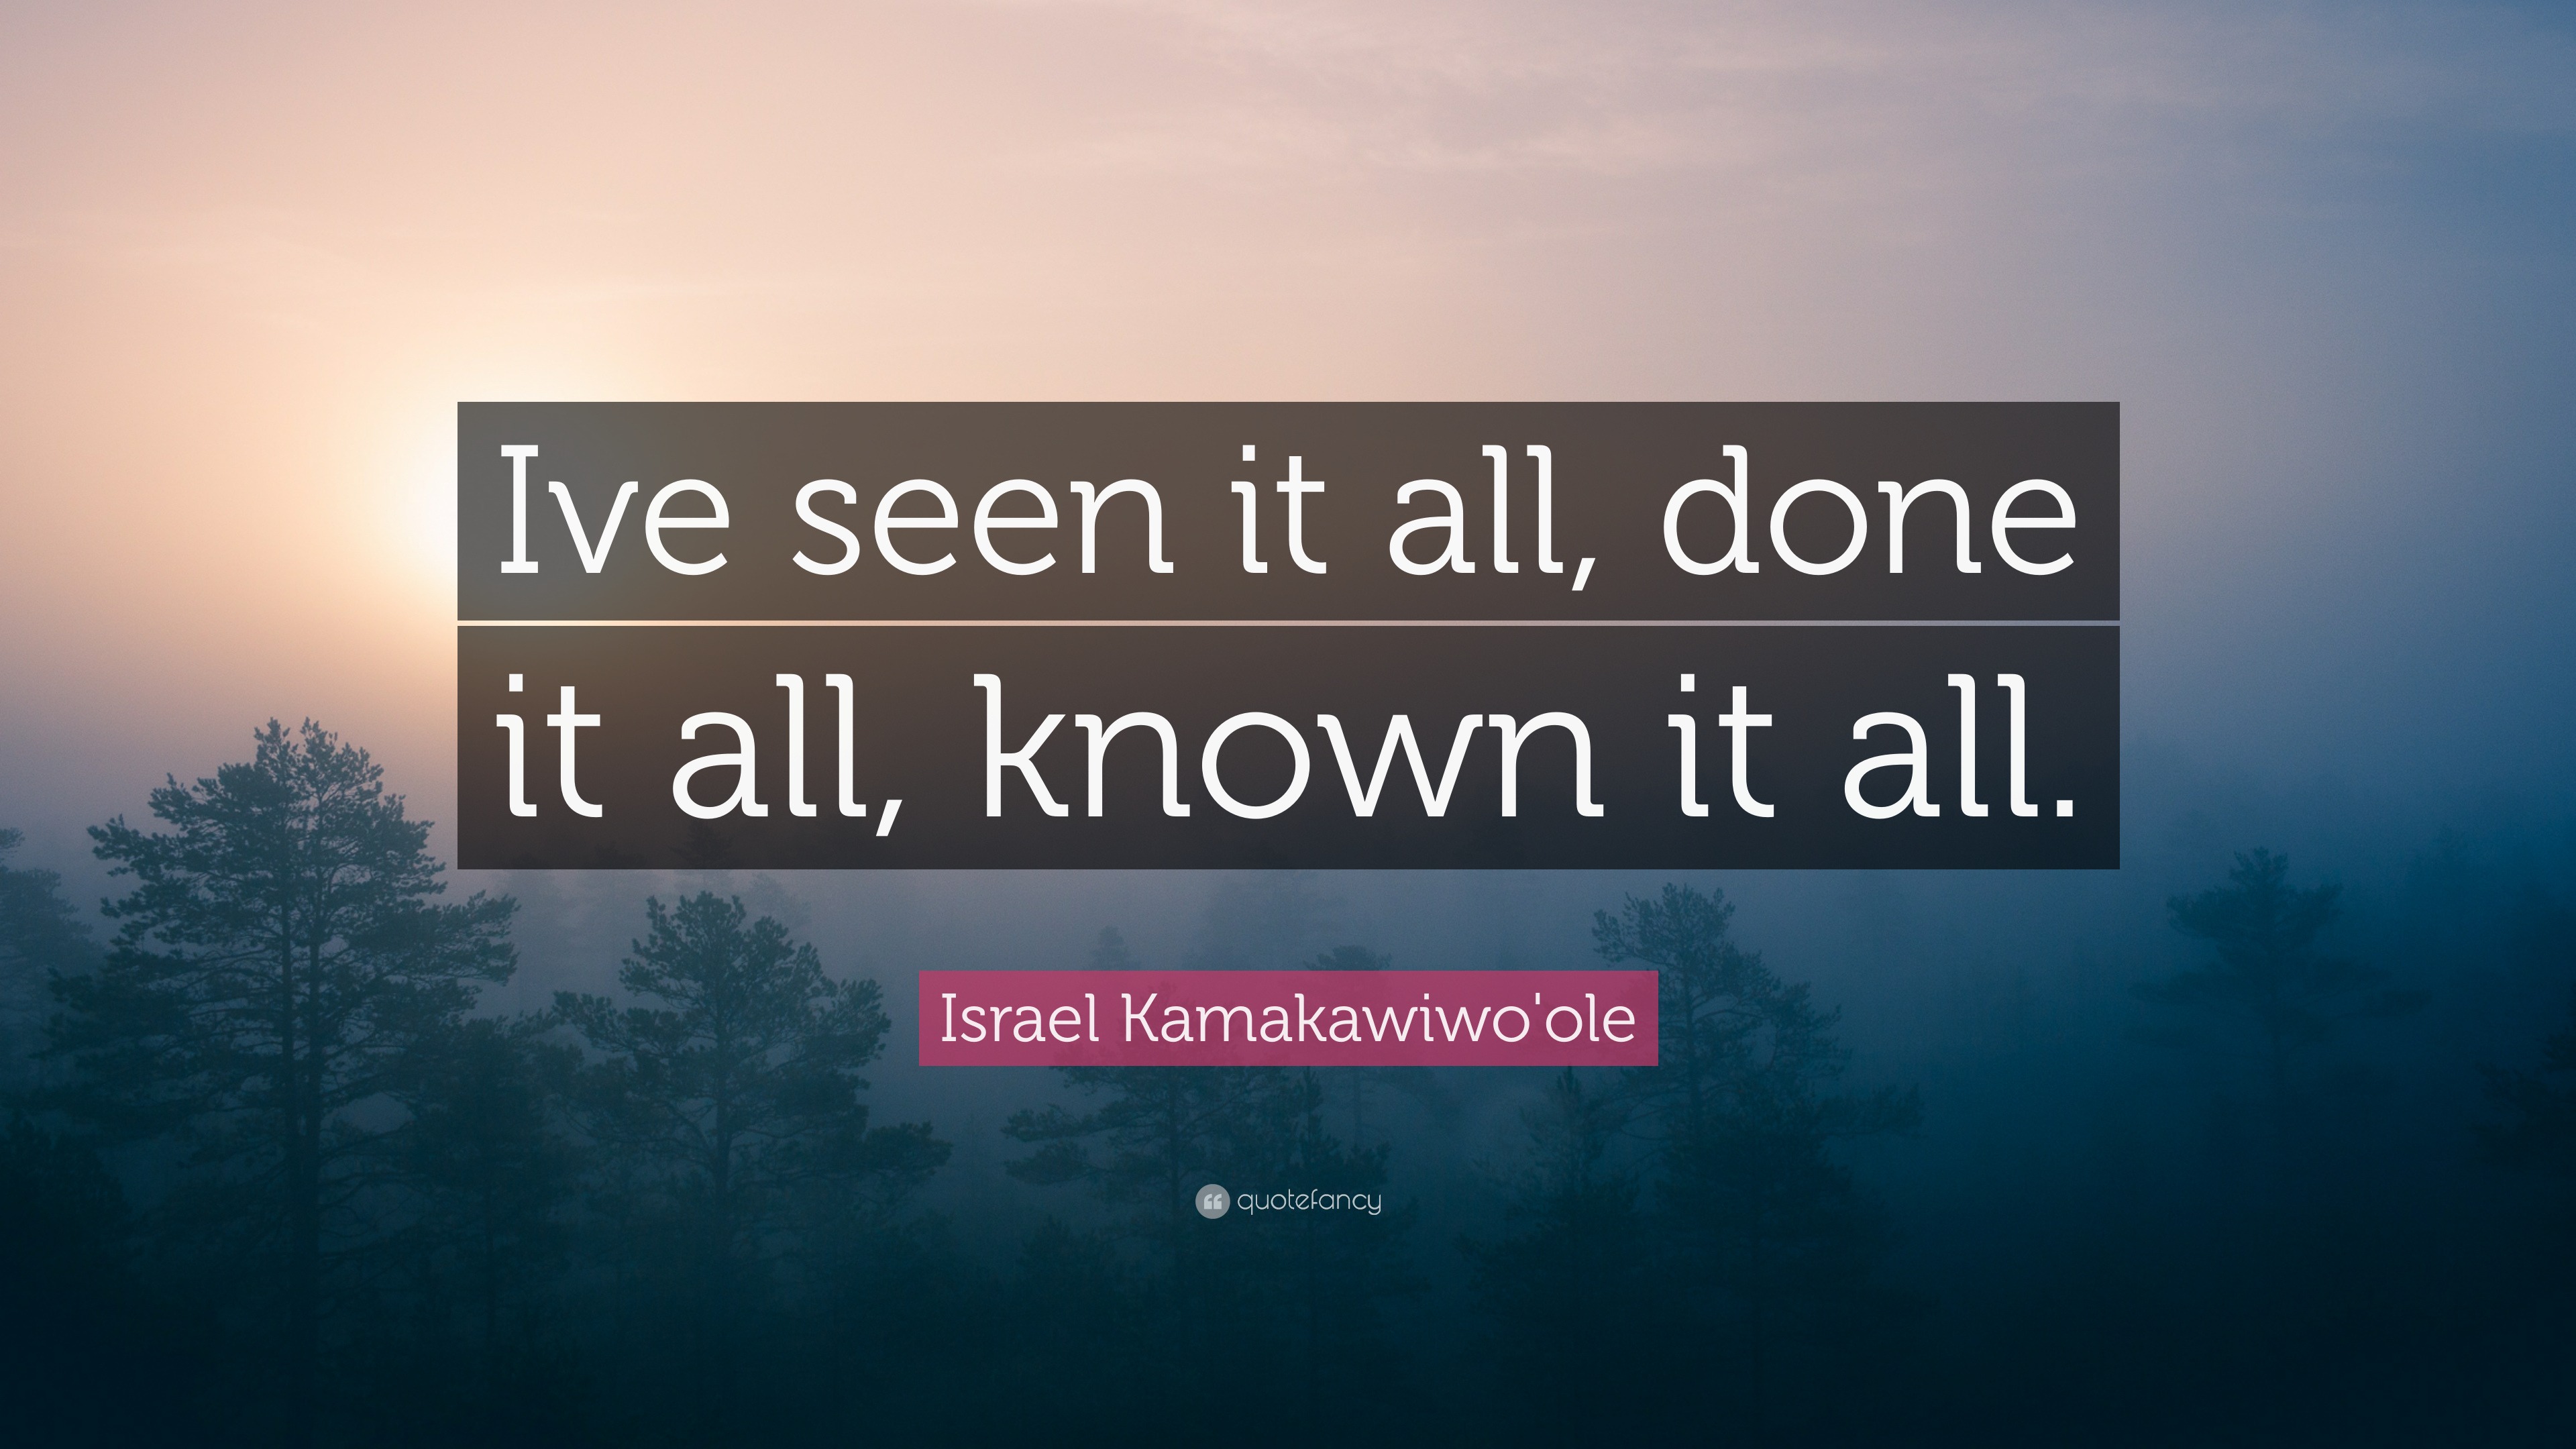 Israel Kamakawiwo'ole Quote: “Ive Seen It All, Done It All, Known It All.”